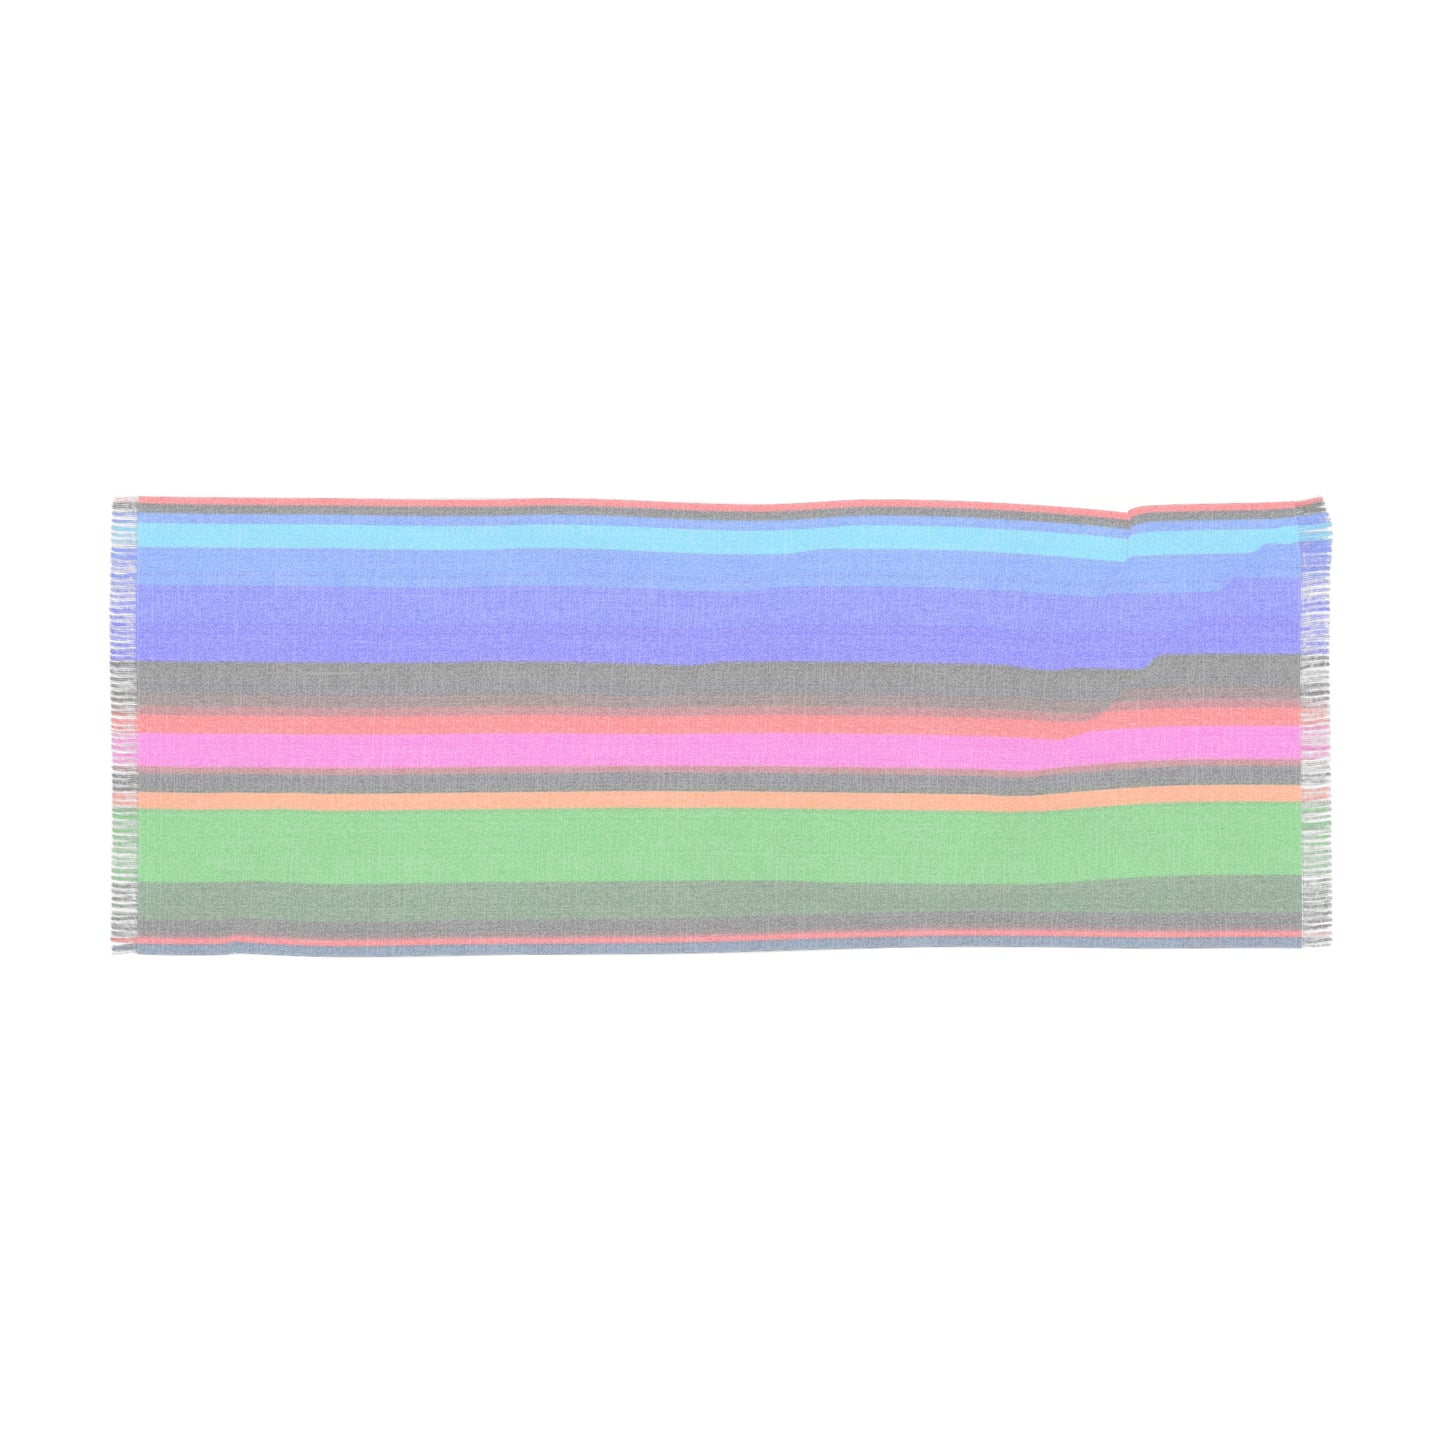 Colorful Serape Light-Weight Scarf, Women's Scarf, Striped Scarf, Women's Accessories, Scarf, Gifts For Her, Gifts For Mom, Shear Scarf